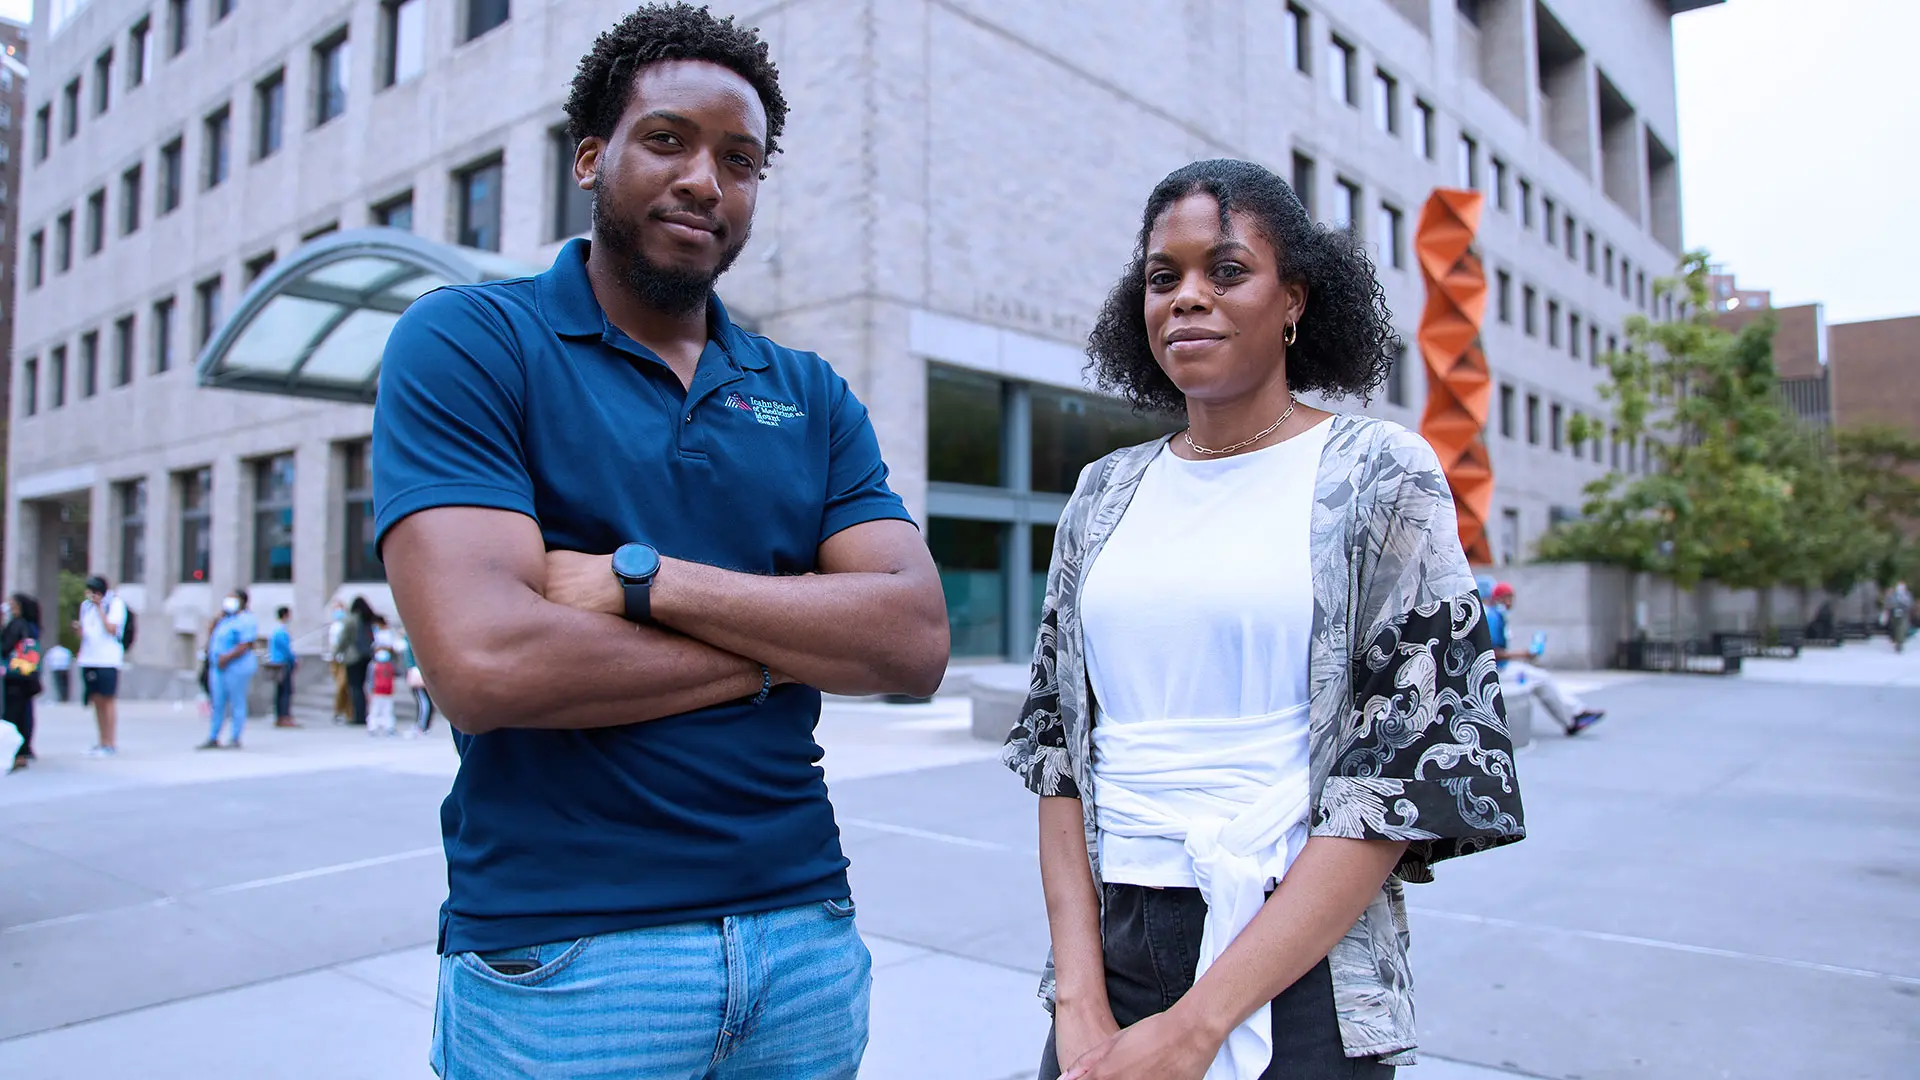 Students for Equal Opportunity in Science Co-Directors Keino Hutchinson and Justine Noel